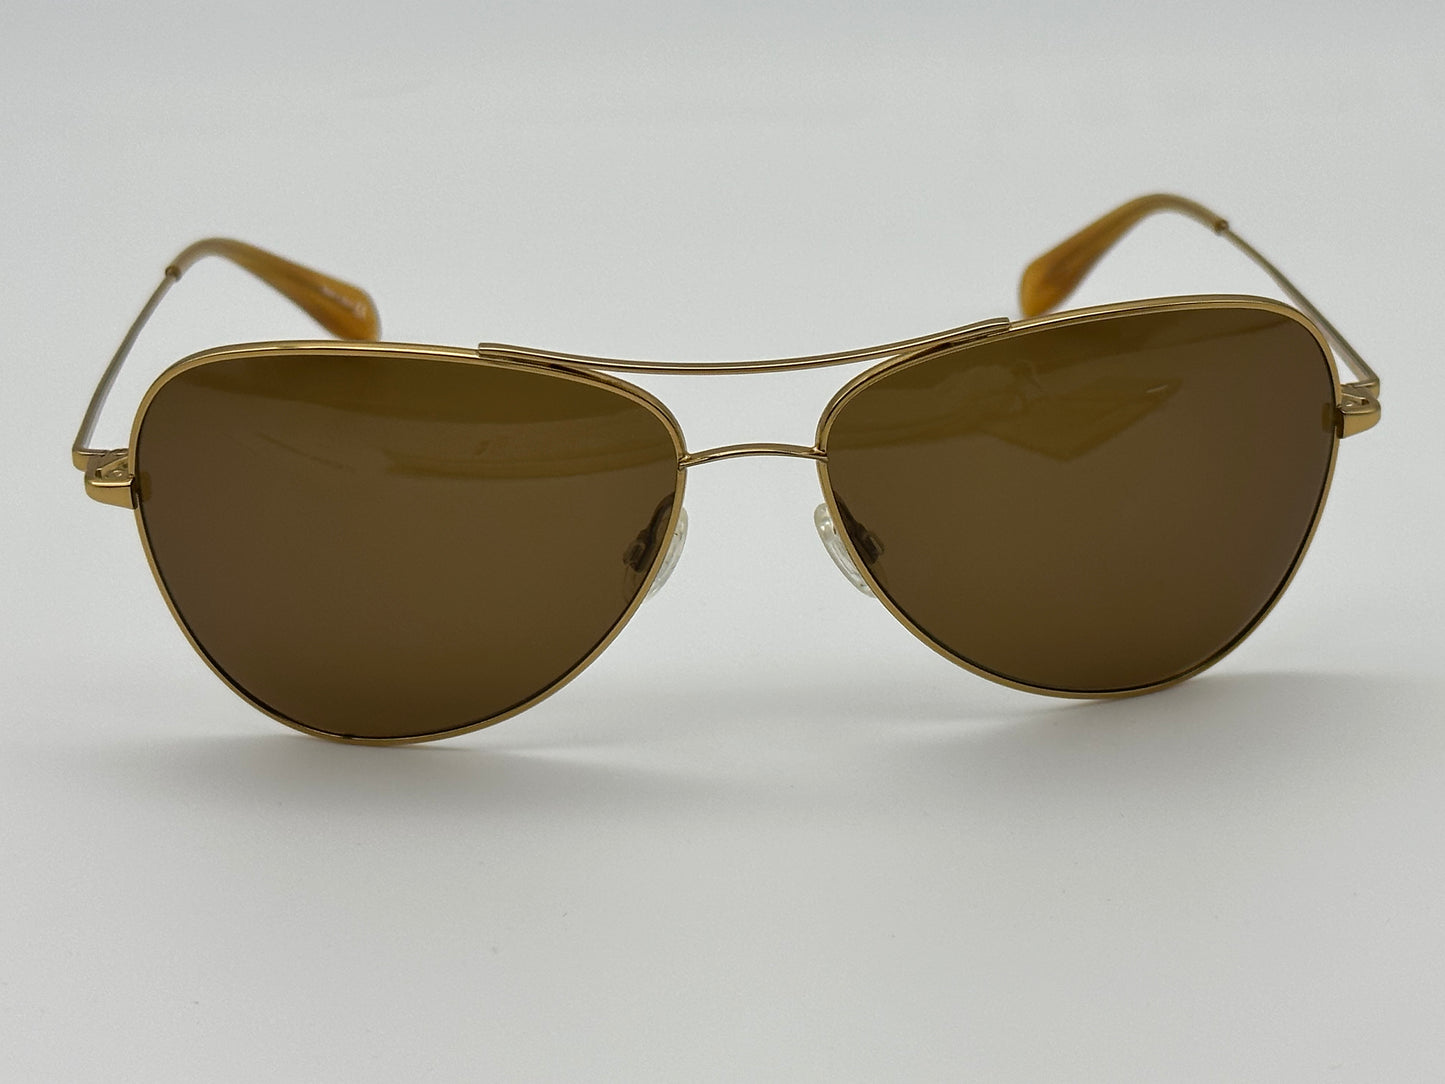 Oliver Peoples for Aerin Sunglasses Pryce G Gold / Brown 61-15-140 Made in Japan NEW Discounted